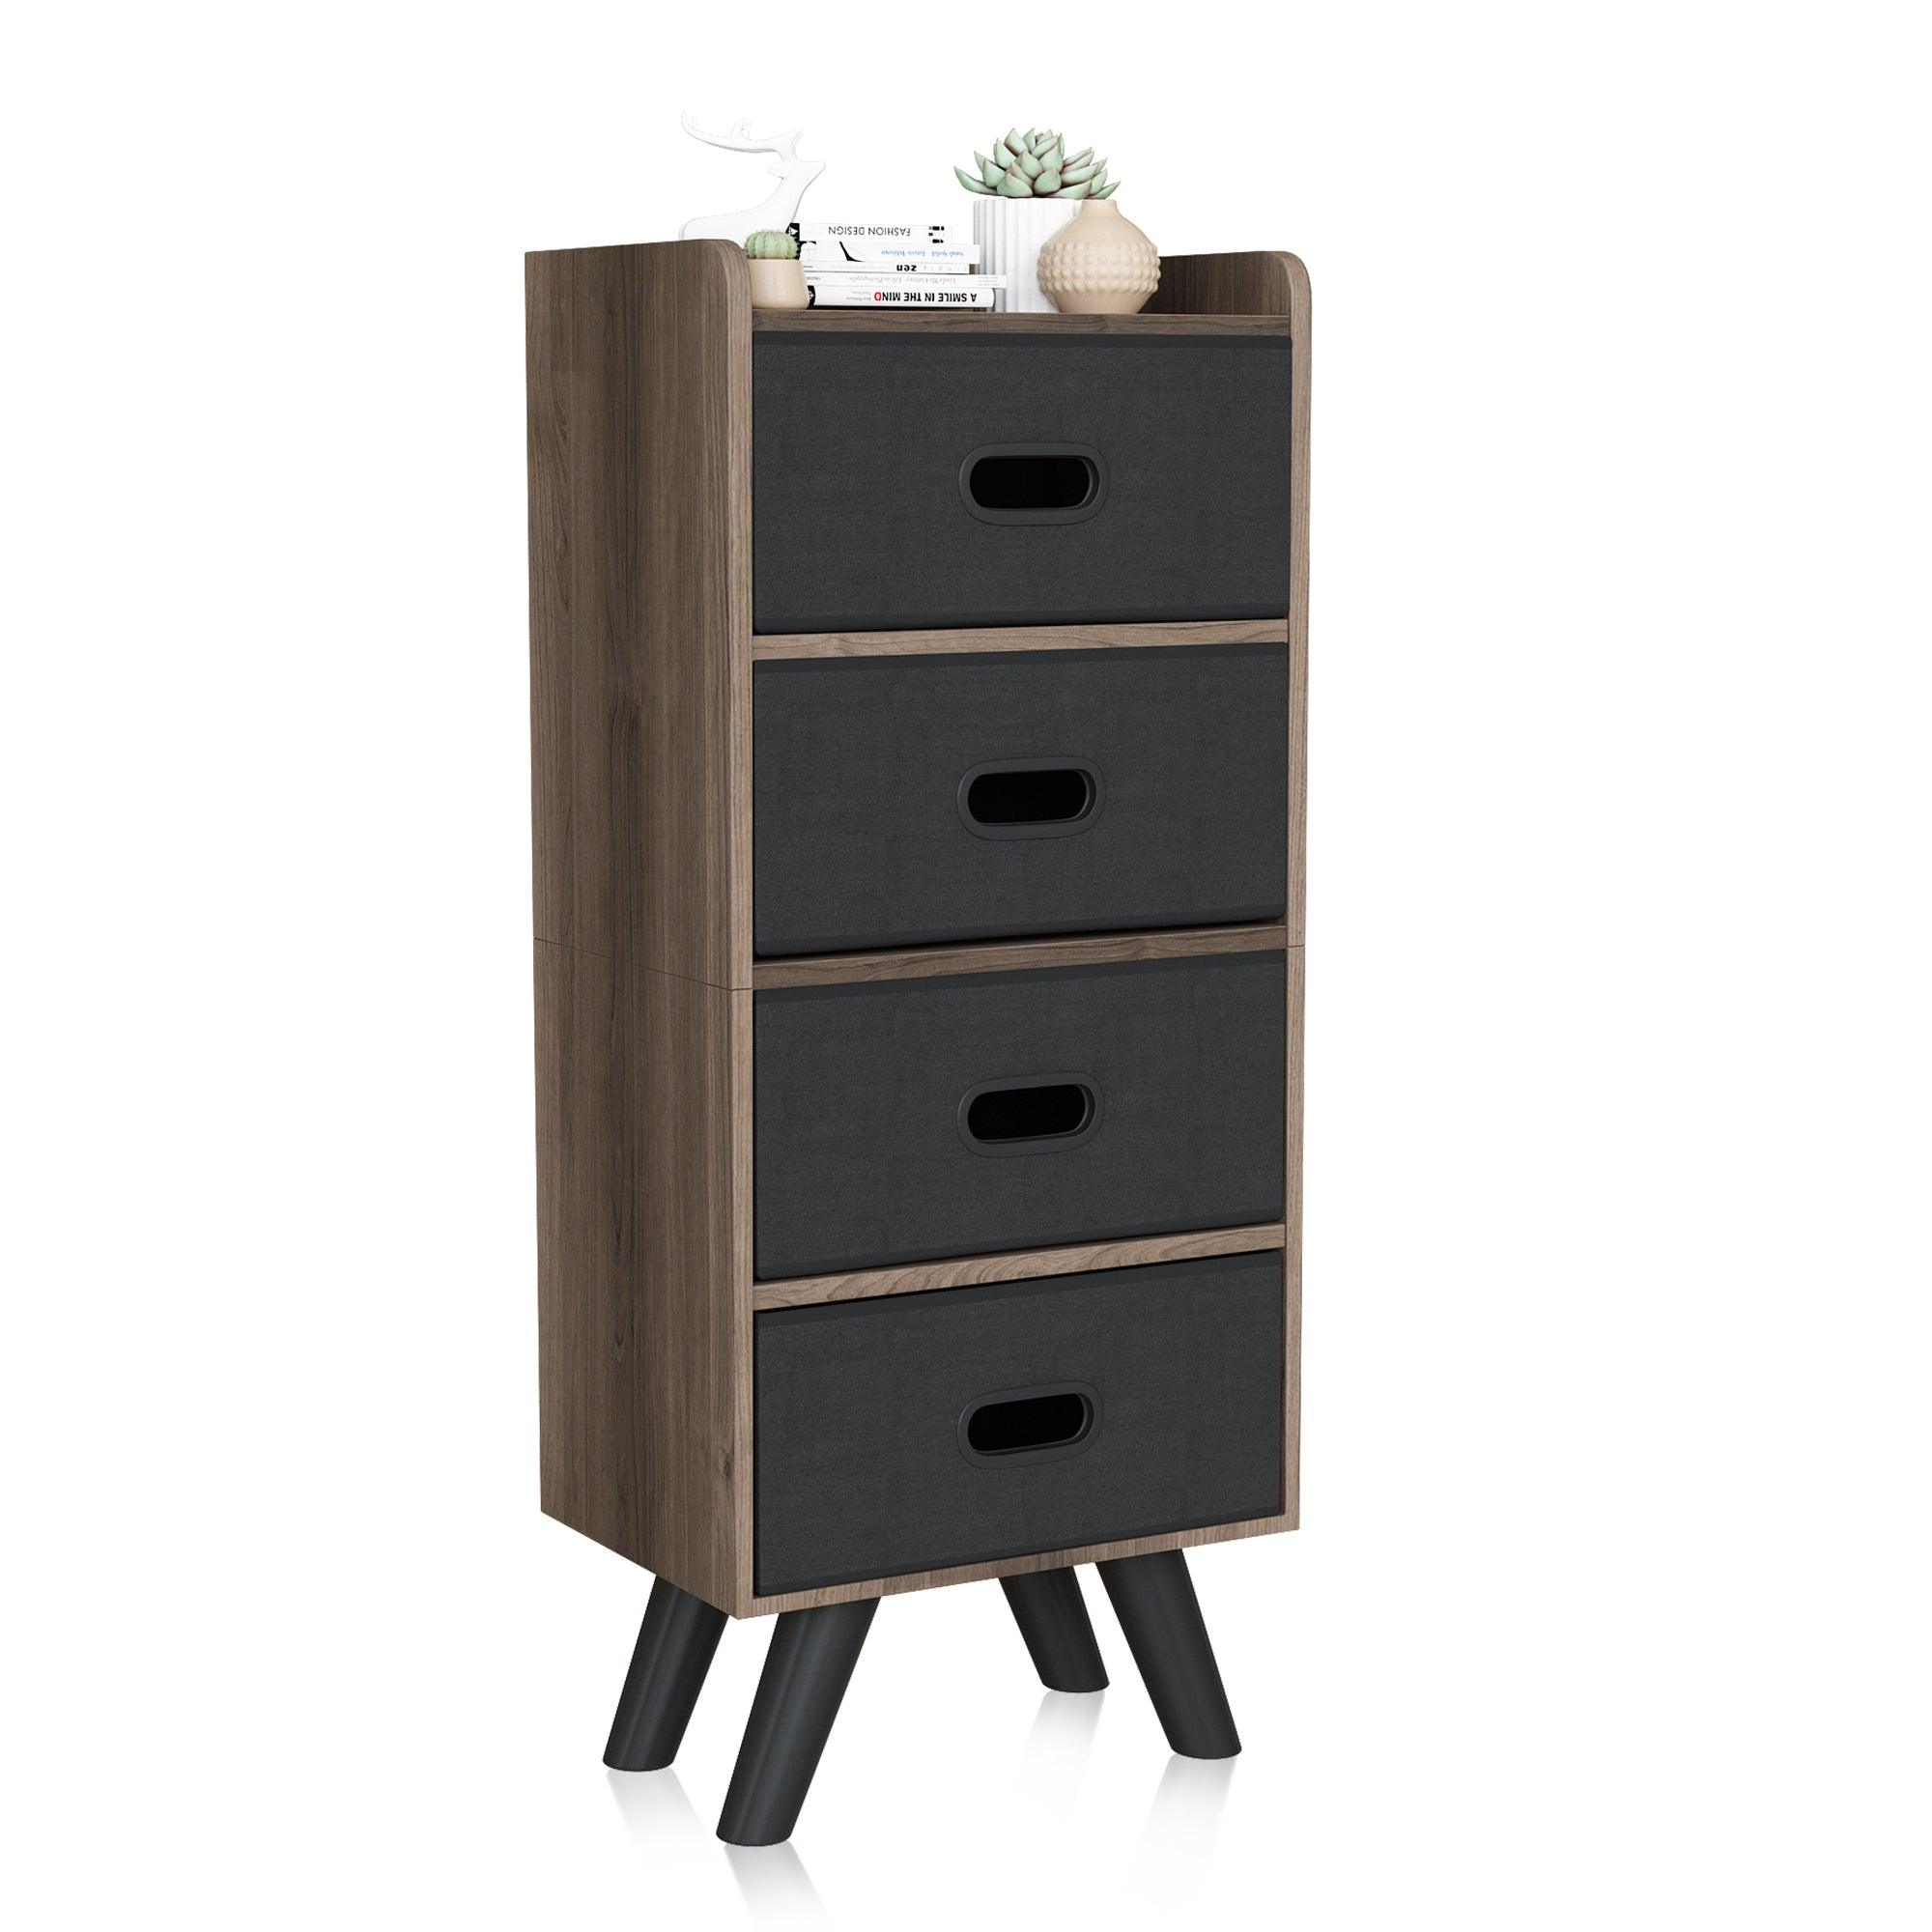 4 Drawer Fabric Dresser Storage Tower, 4-Tier Wide Drawer Dresser, Fabric Storage Tower With Handrail And Removable Drawers, Organizer Unit For Bedroom, Closet, Entryway, Hallway, Nursery Ro LamCham